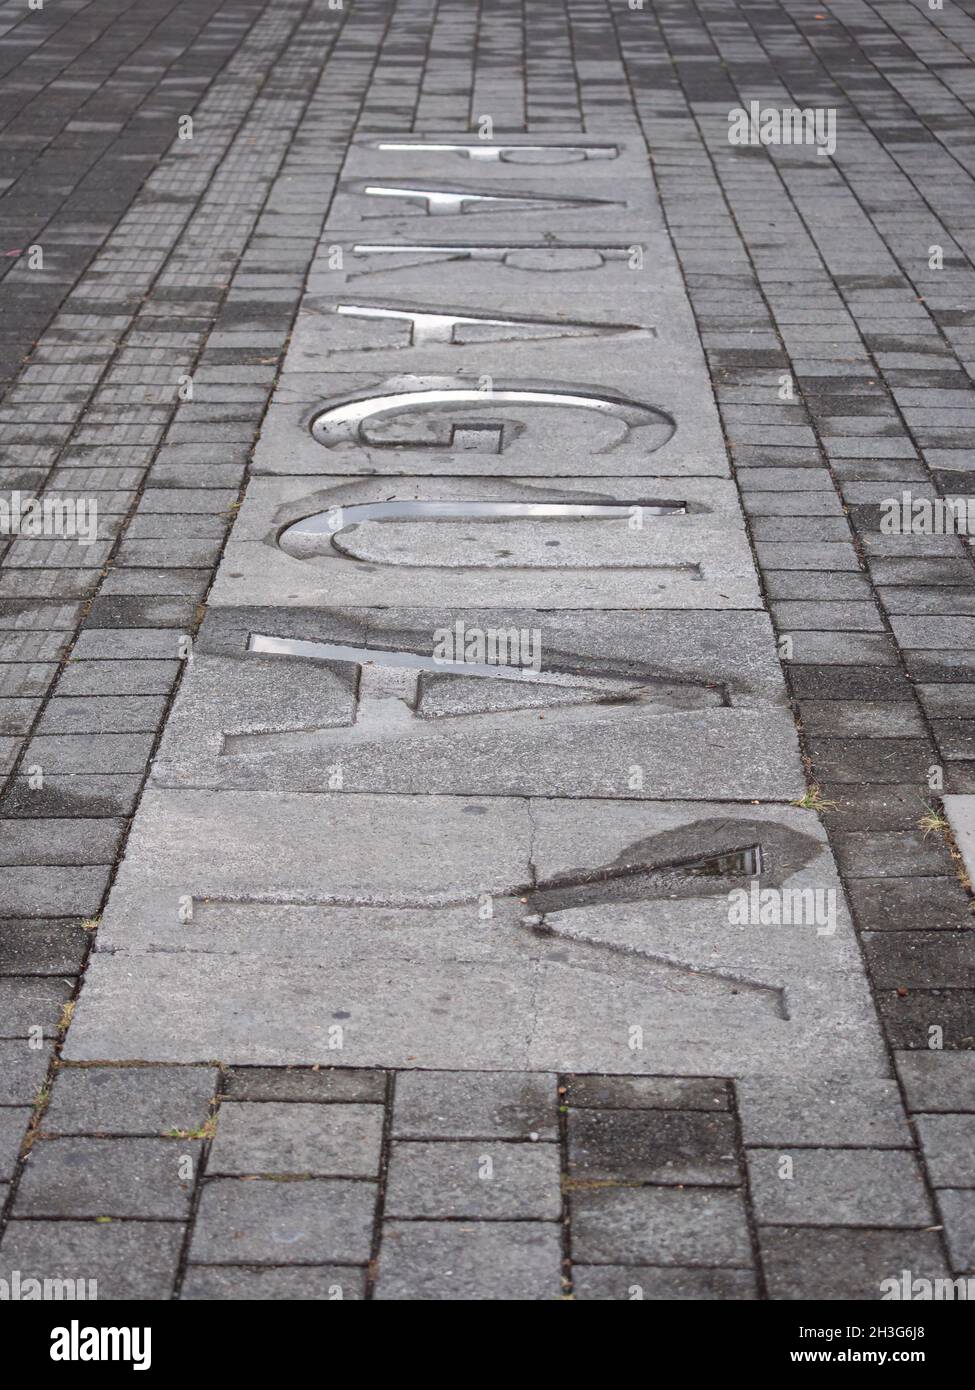 Paraguay, Country Name Written in Large Letters on a Wet Cement Floor in a Public Park Stock Photo